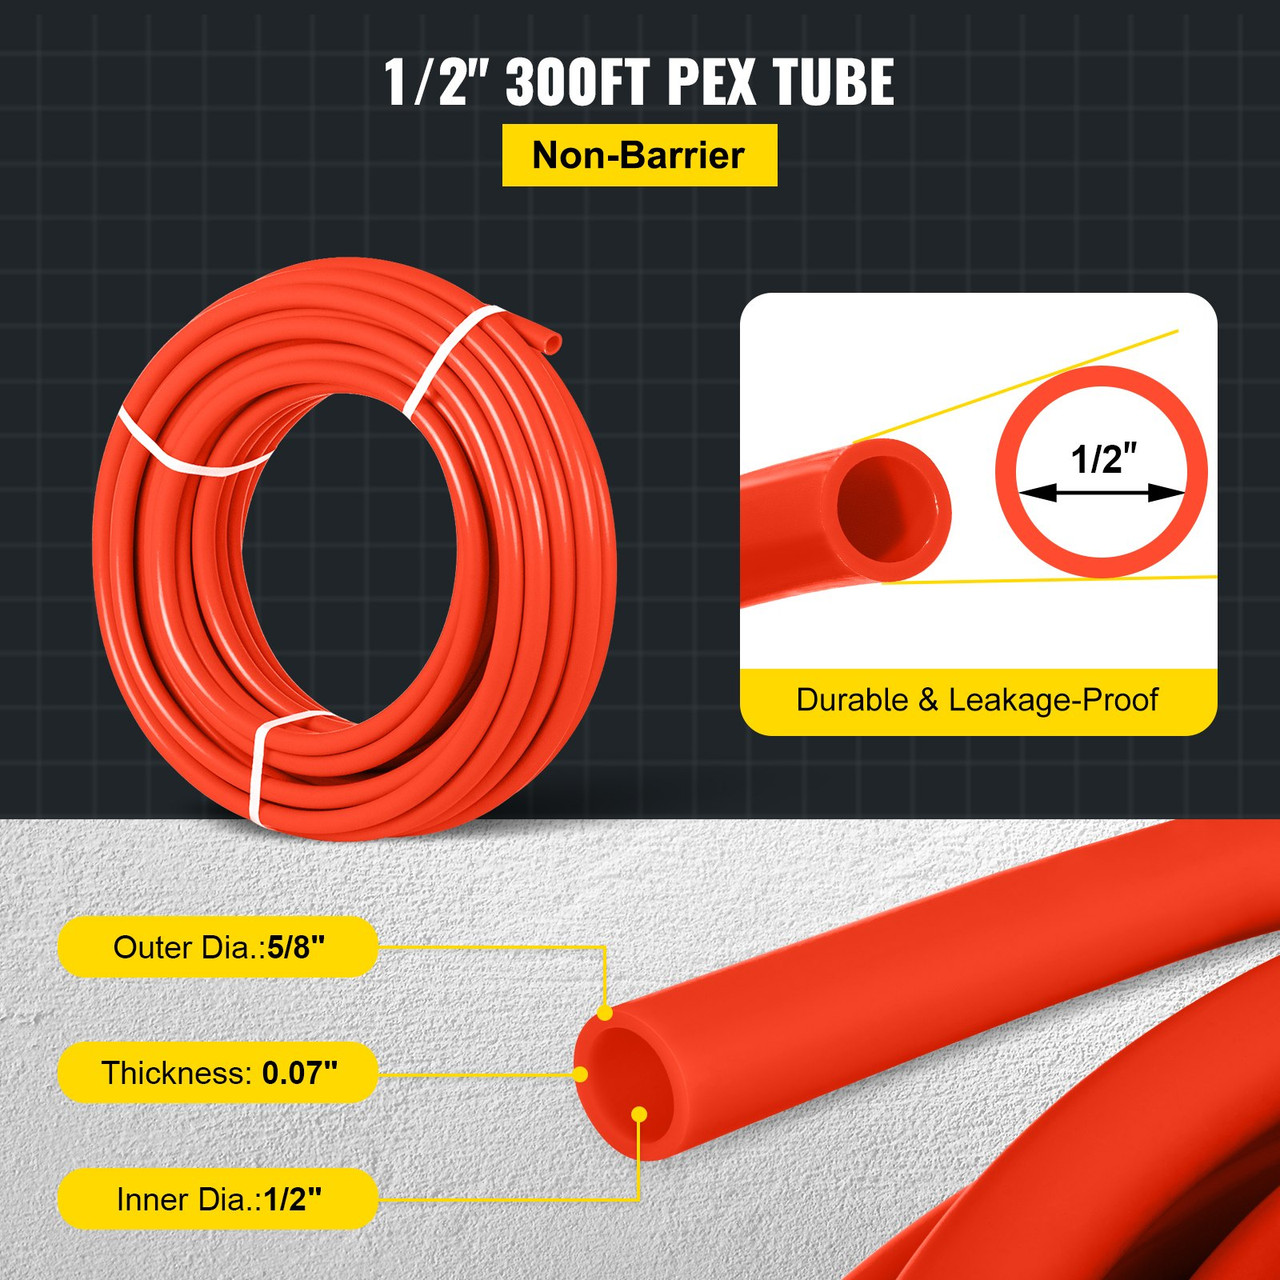 PEX Tubing Potable Water Tube 1/2 Inch x 300 FT PEX-B Plumbing Pipe Non-Barrier Radiant Heating Pex Coil for Water Plumbing Open Loop Hydronic Heating Systems (1/2" Non-Barrier, 300Ft/Red)